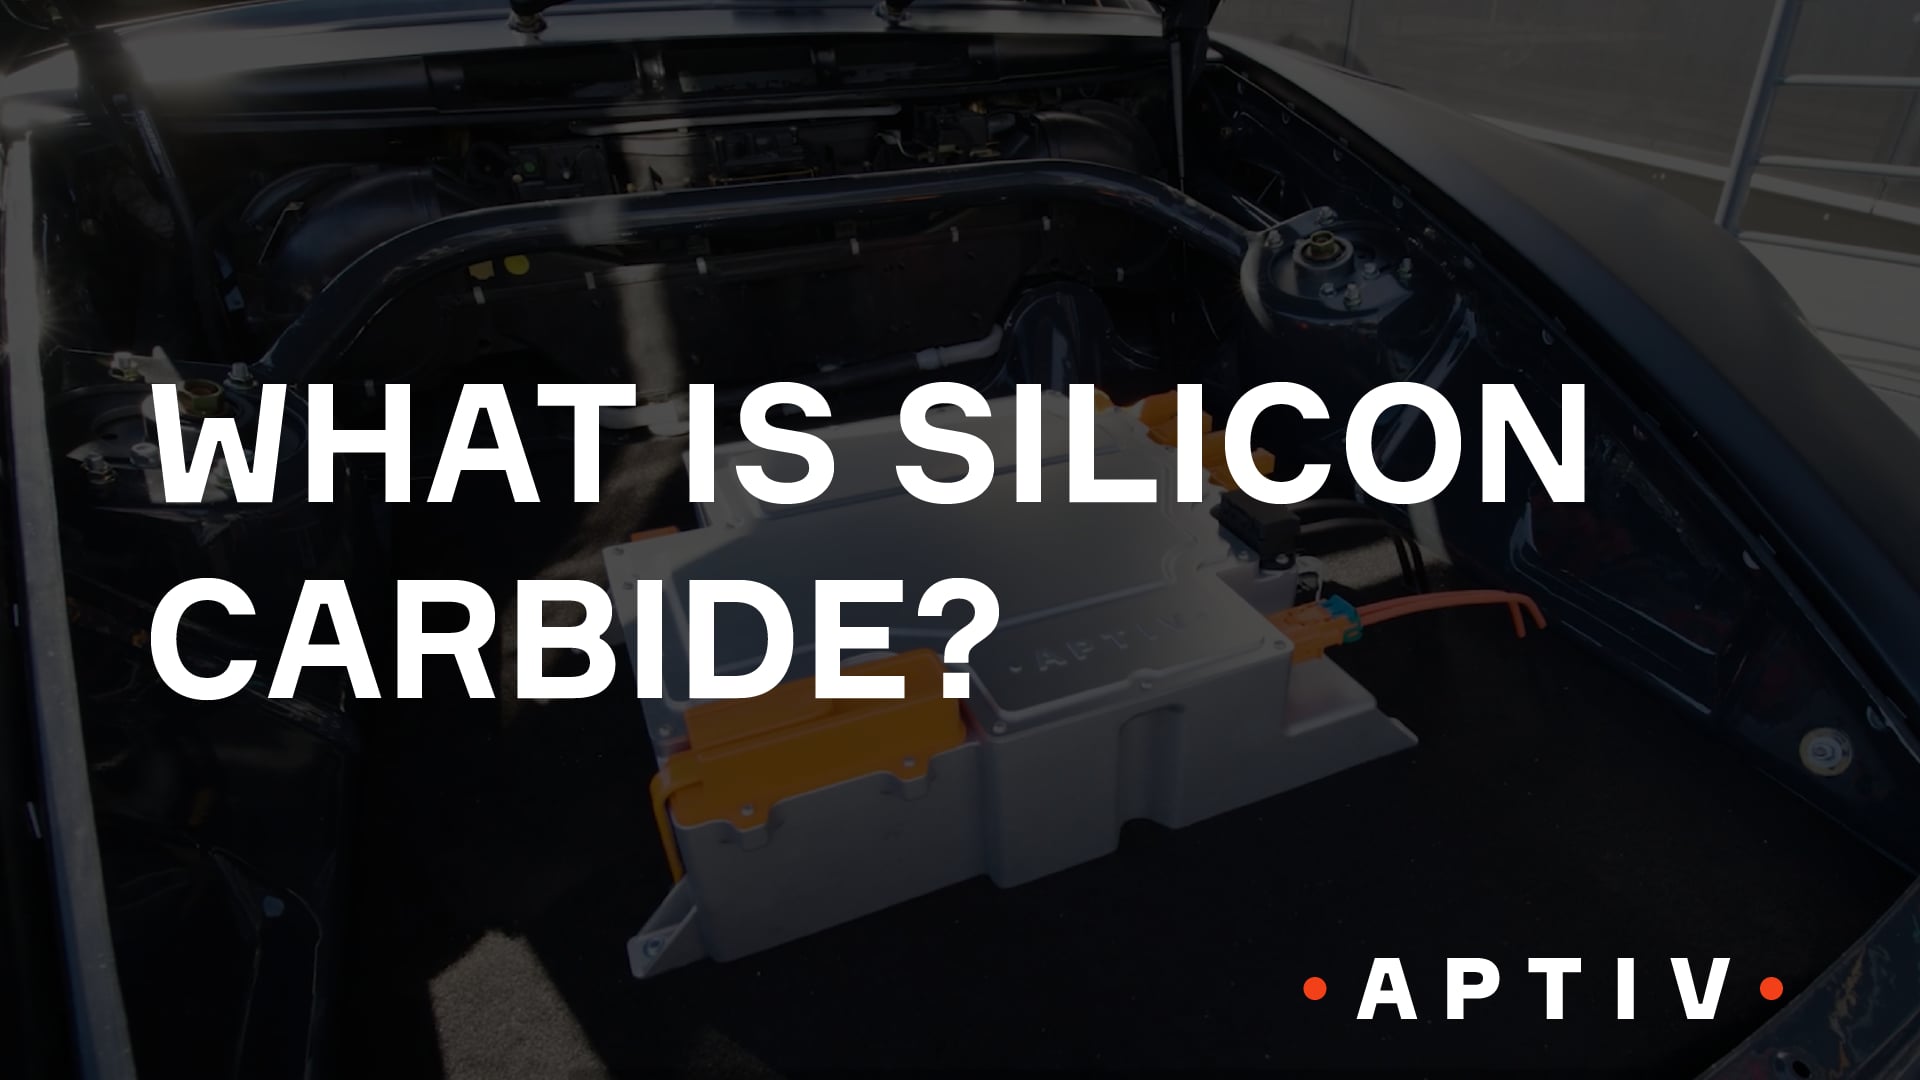 What is Silicon Carbide?